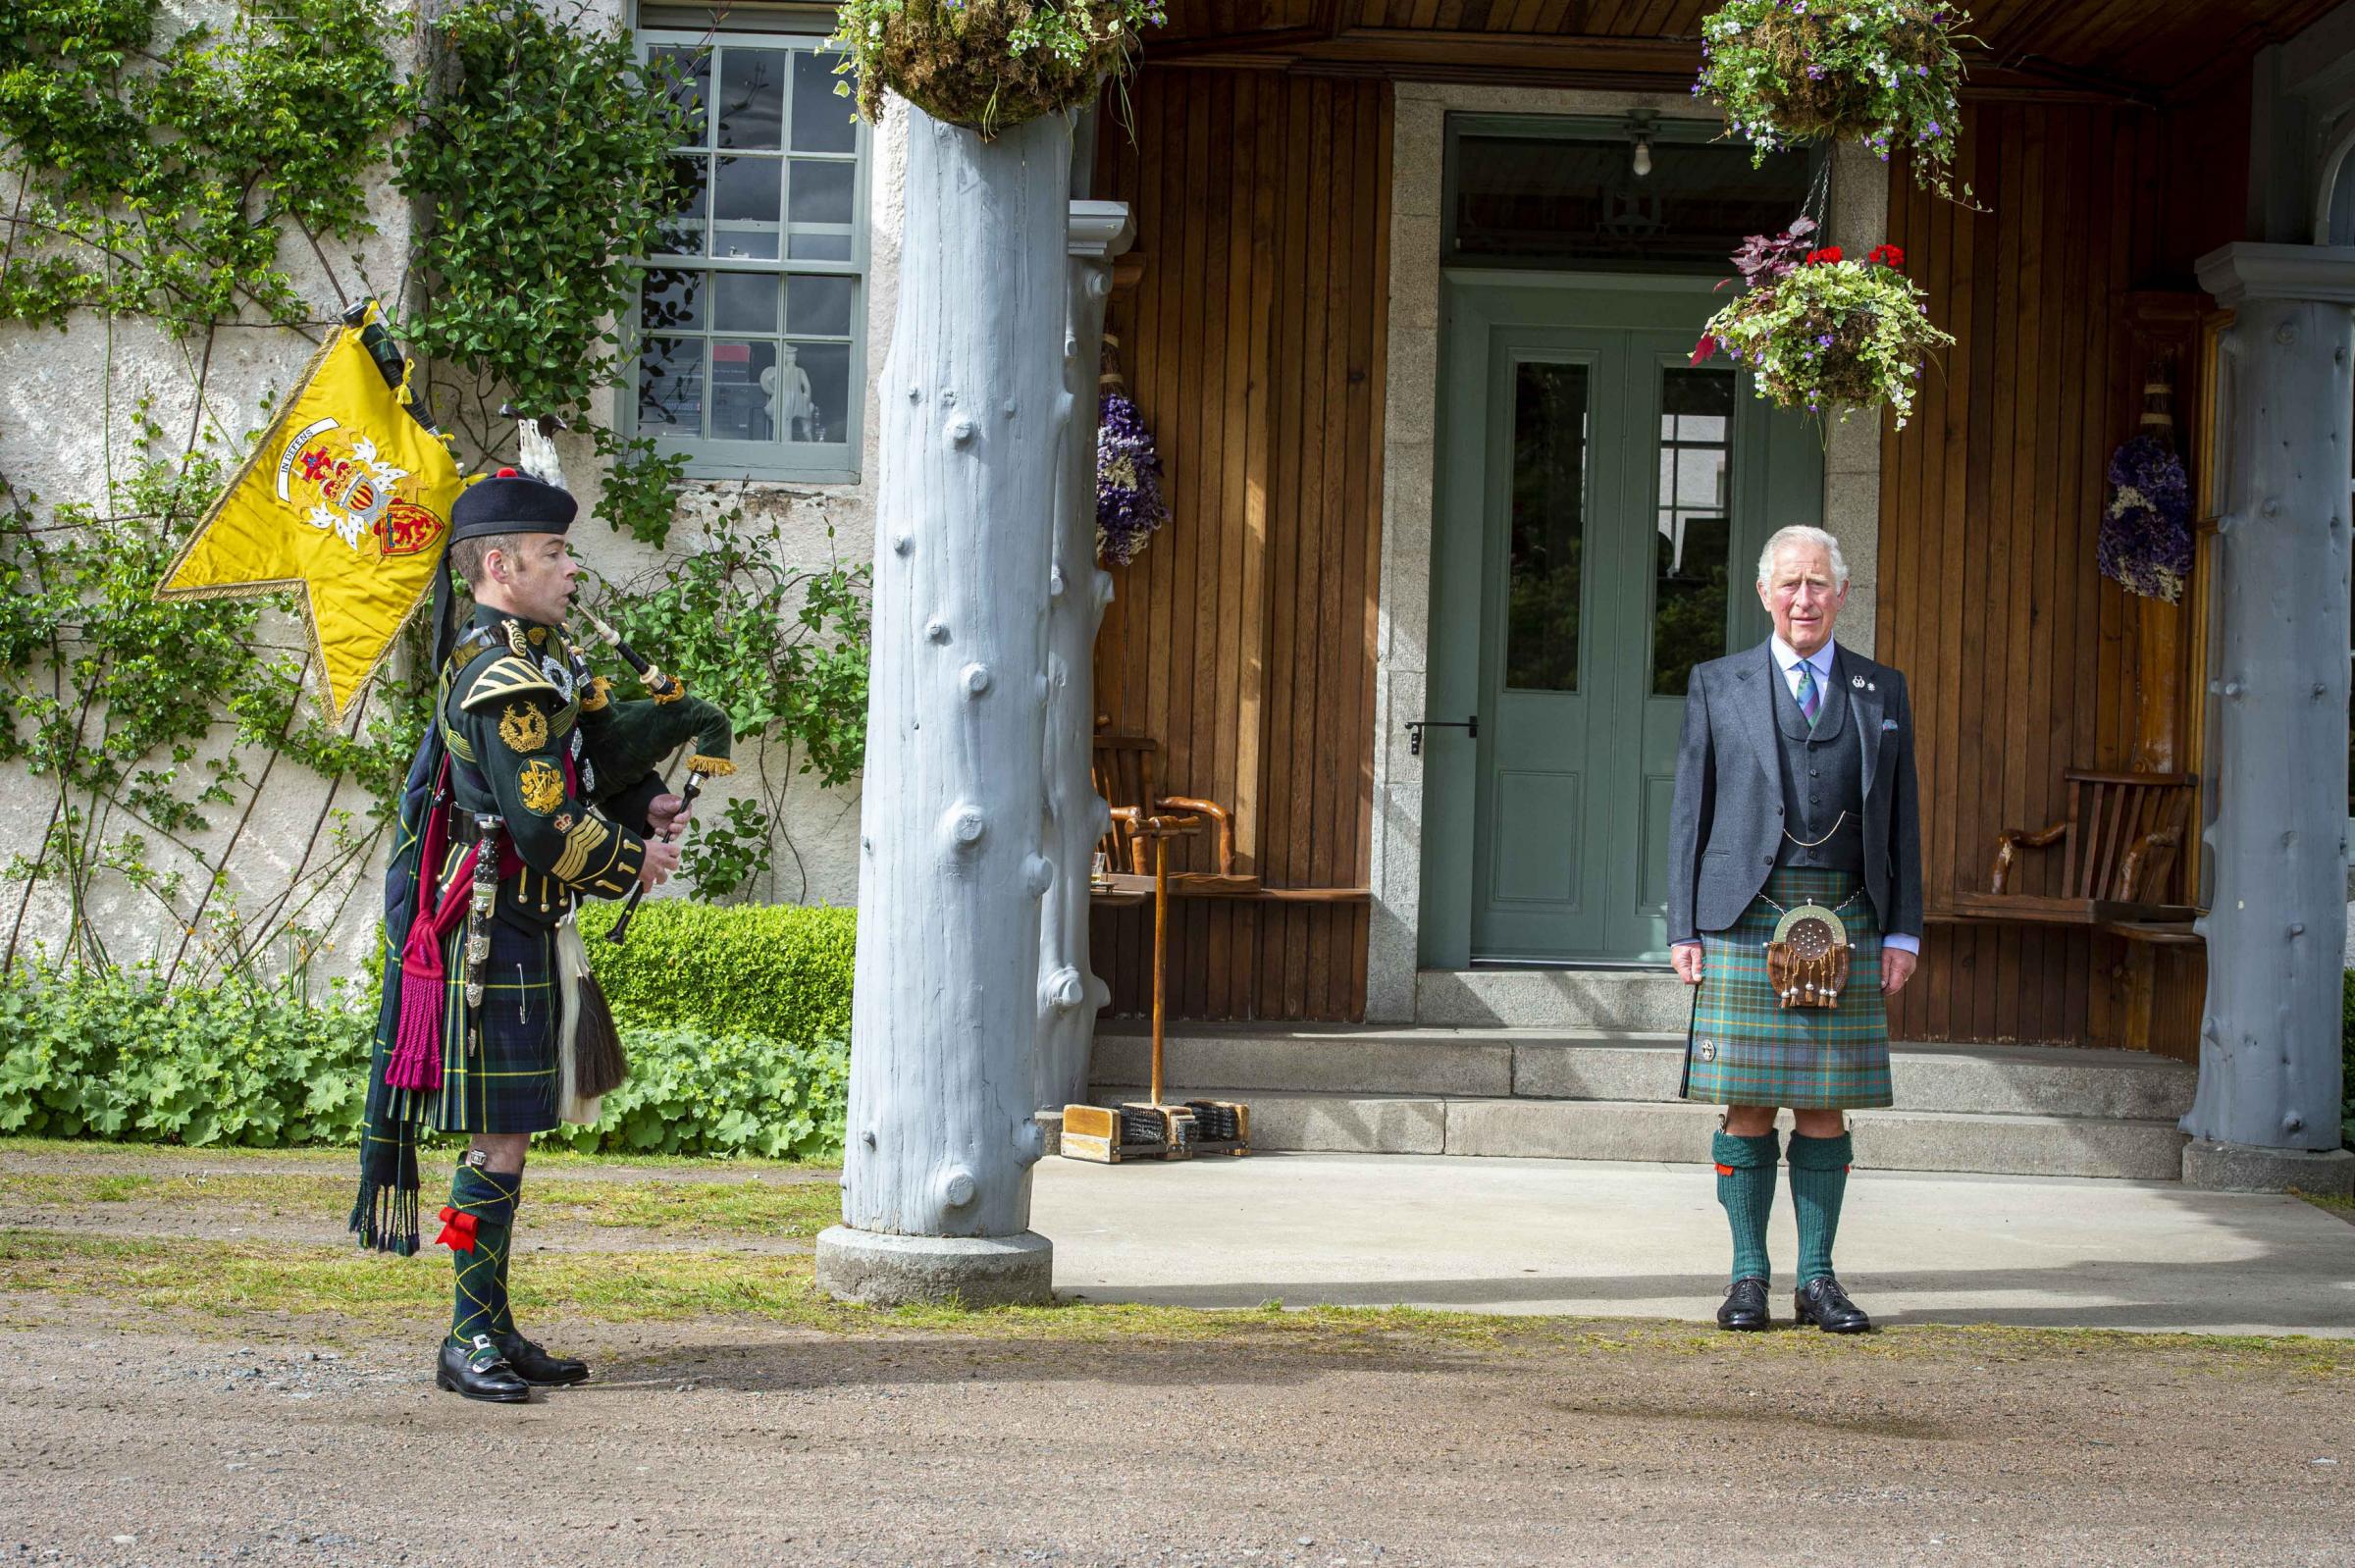 HRH, the Prince of Wales taking a salute as a piper plays during a St Valery commemoration at his Birkhall residence in Scotland. Photo credit should read: Mark Owens/Poppyscotland.